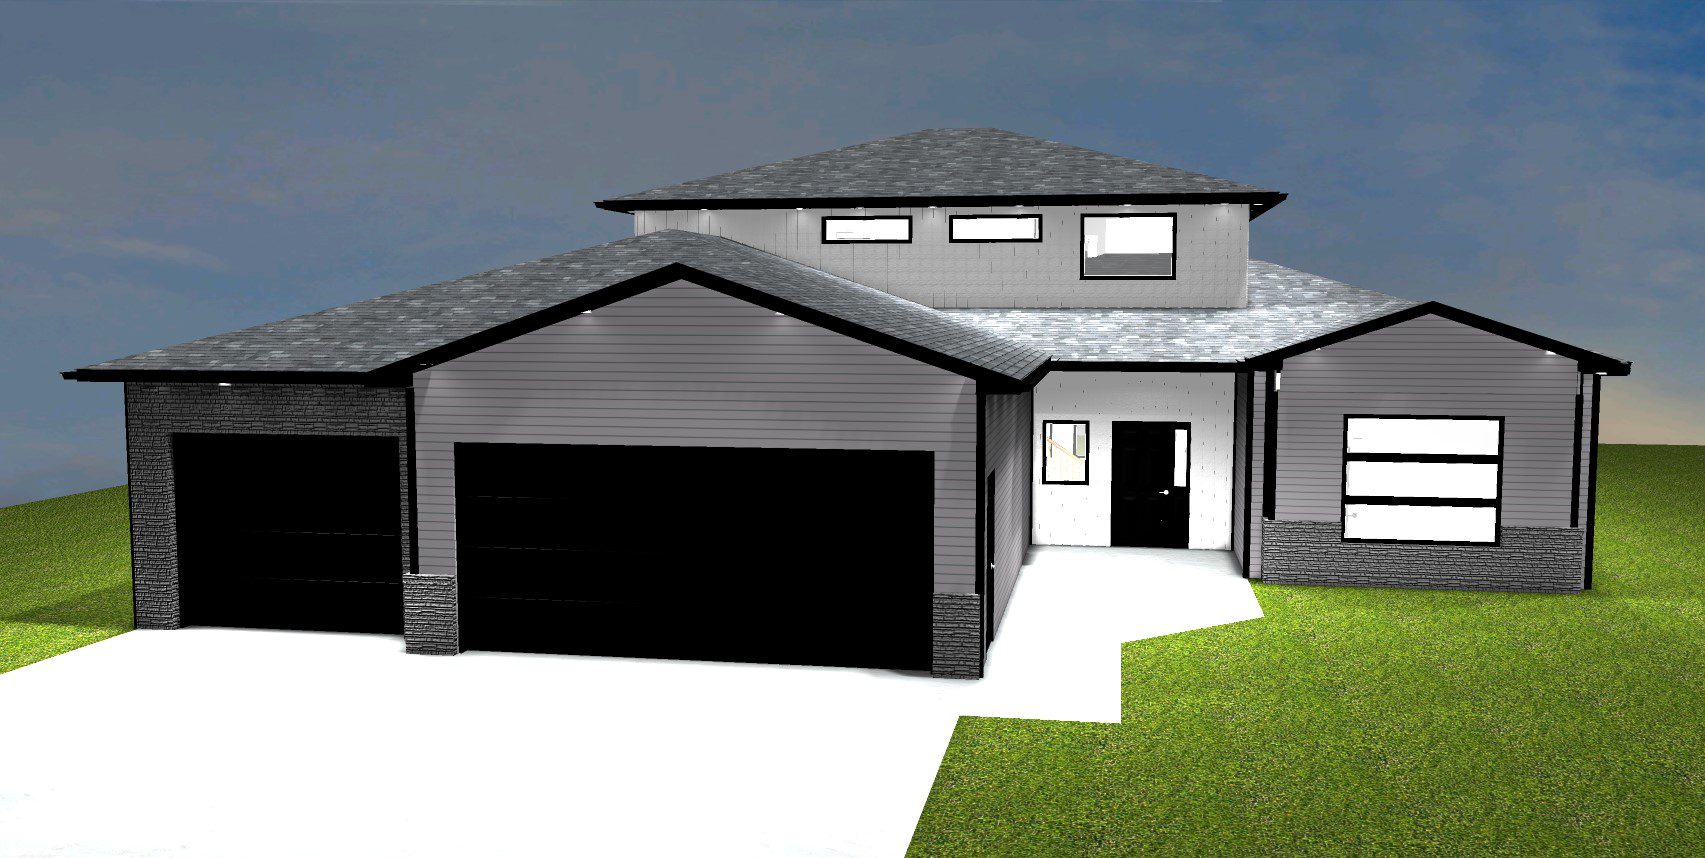 A 3 d rendering of the front of a house.